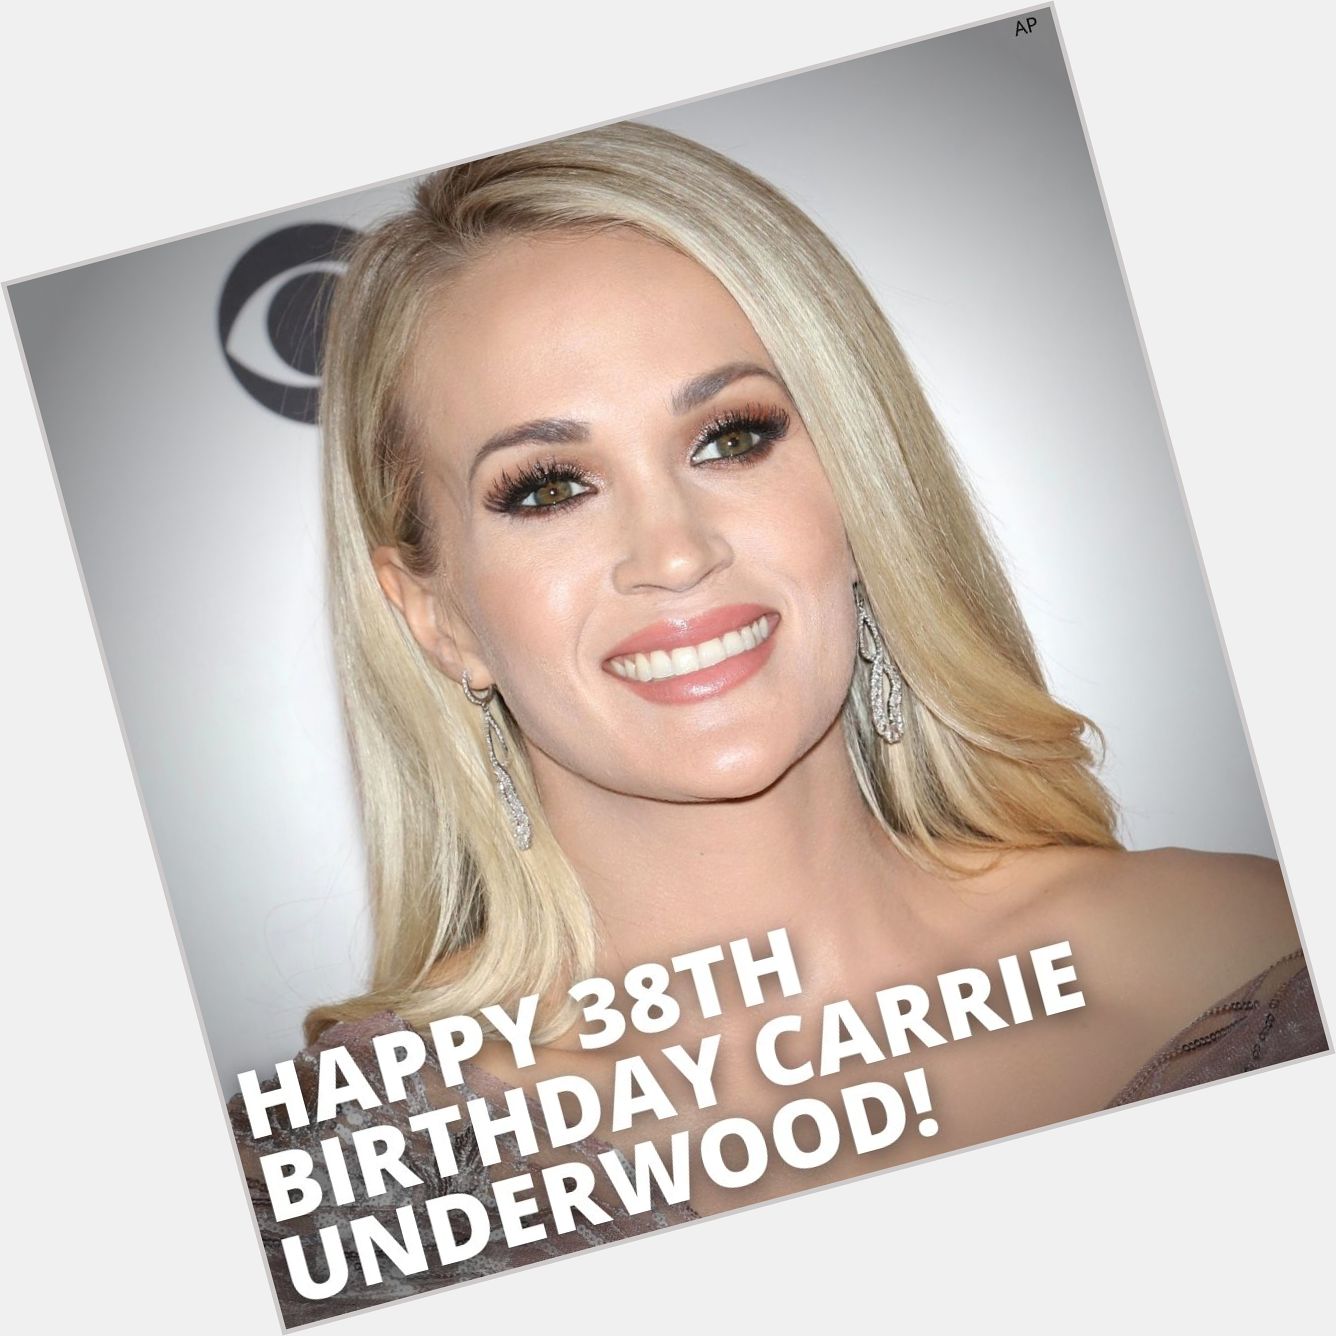 Happy 38th birthday, Carrie Underwood! \"Throw caution to the wind and just do it.\" - Carrie Underwood 